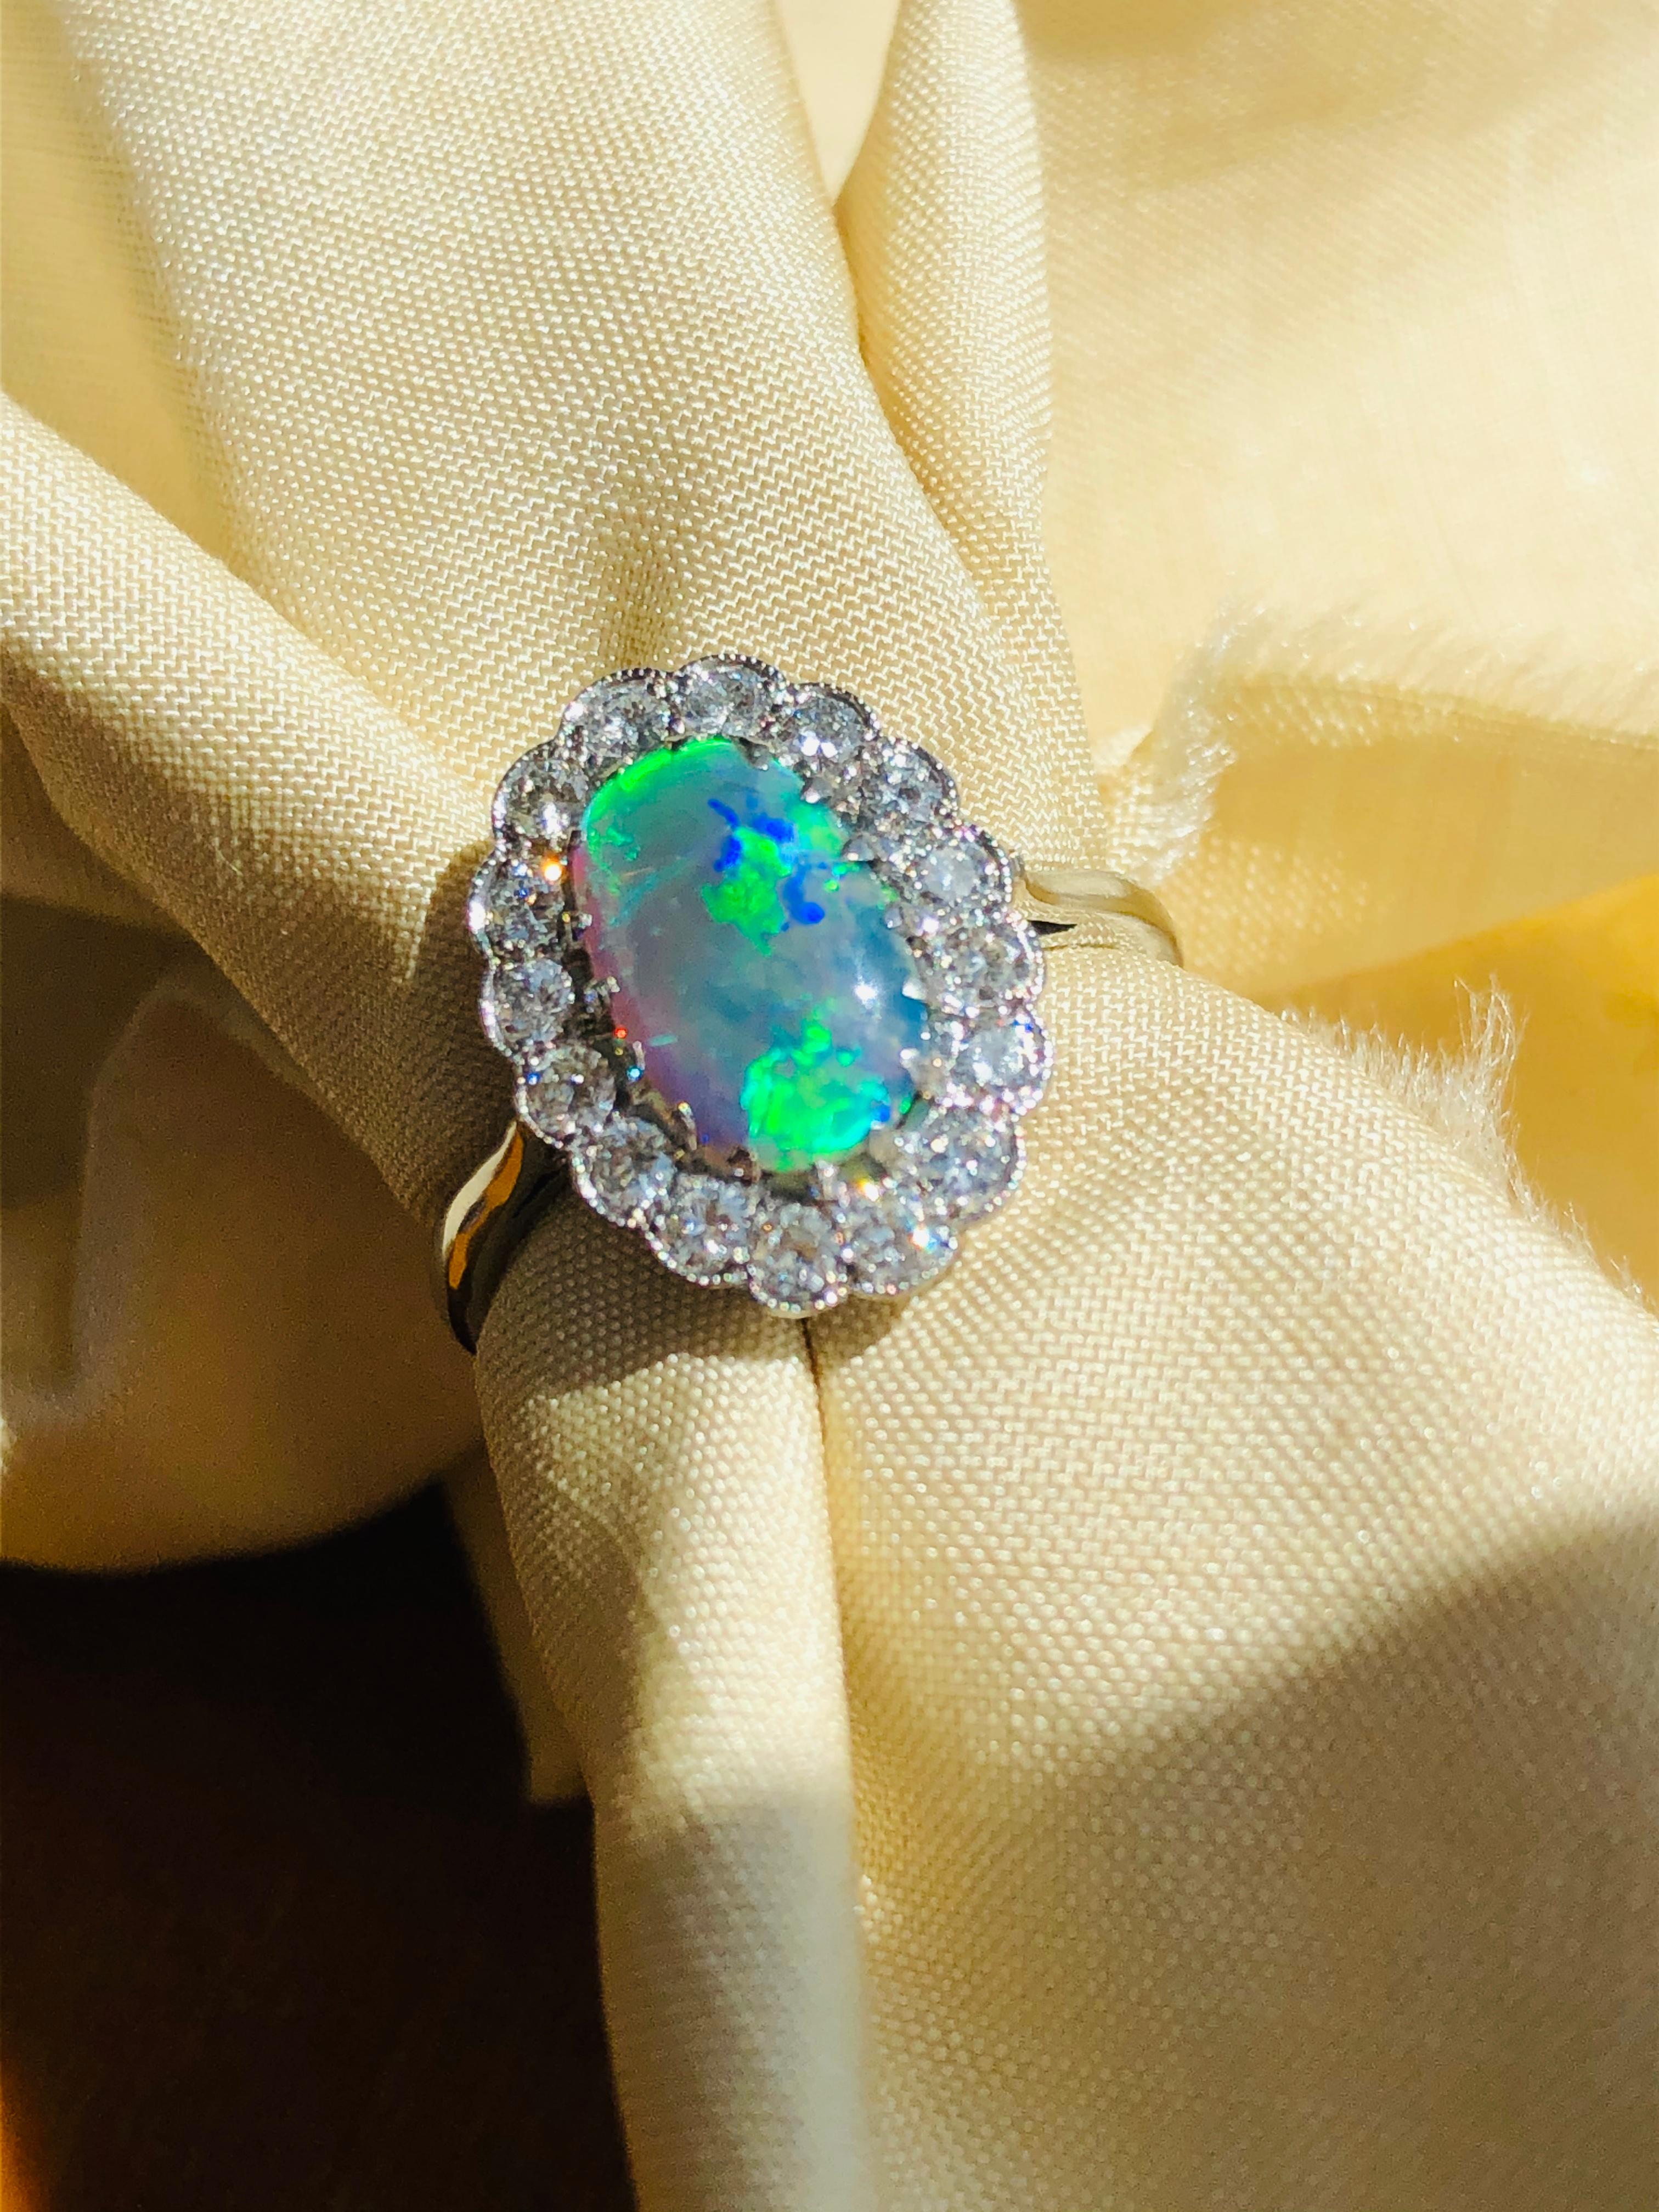 Art Deco, black opal and diamond ring, circa 1920. Set with an incredible black opal; displaying a strong mixture of green and blue tones surrounded by a single row of diamonds all set in platinum.

Black Opal: 10.5mm x 6.5mm x 3.5mm

Country of